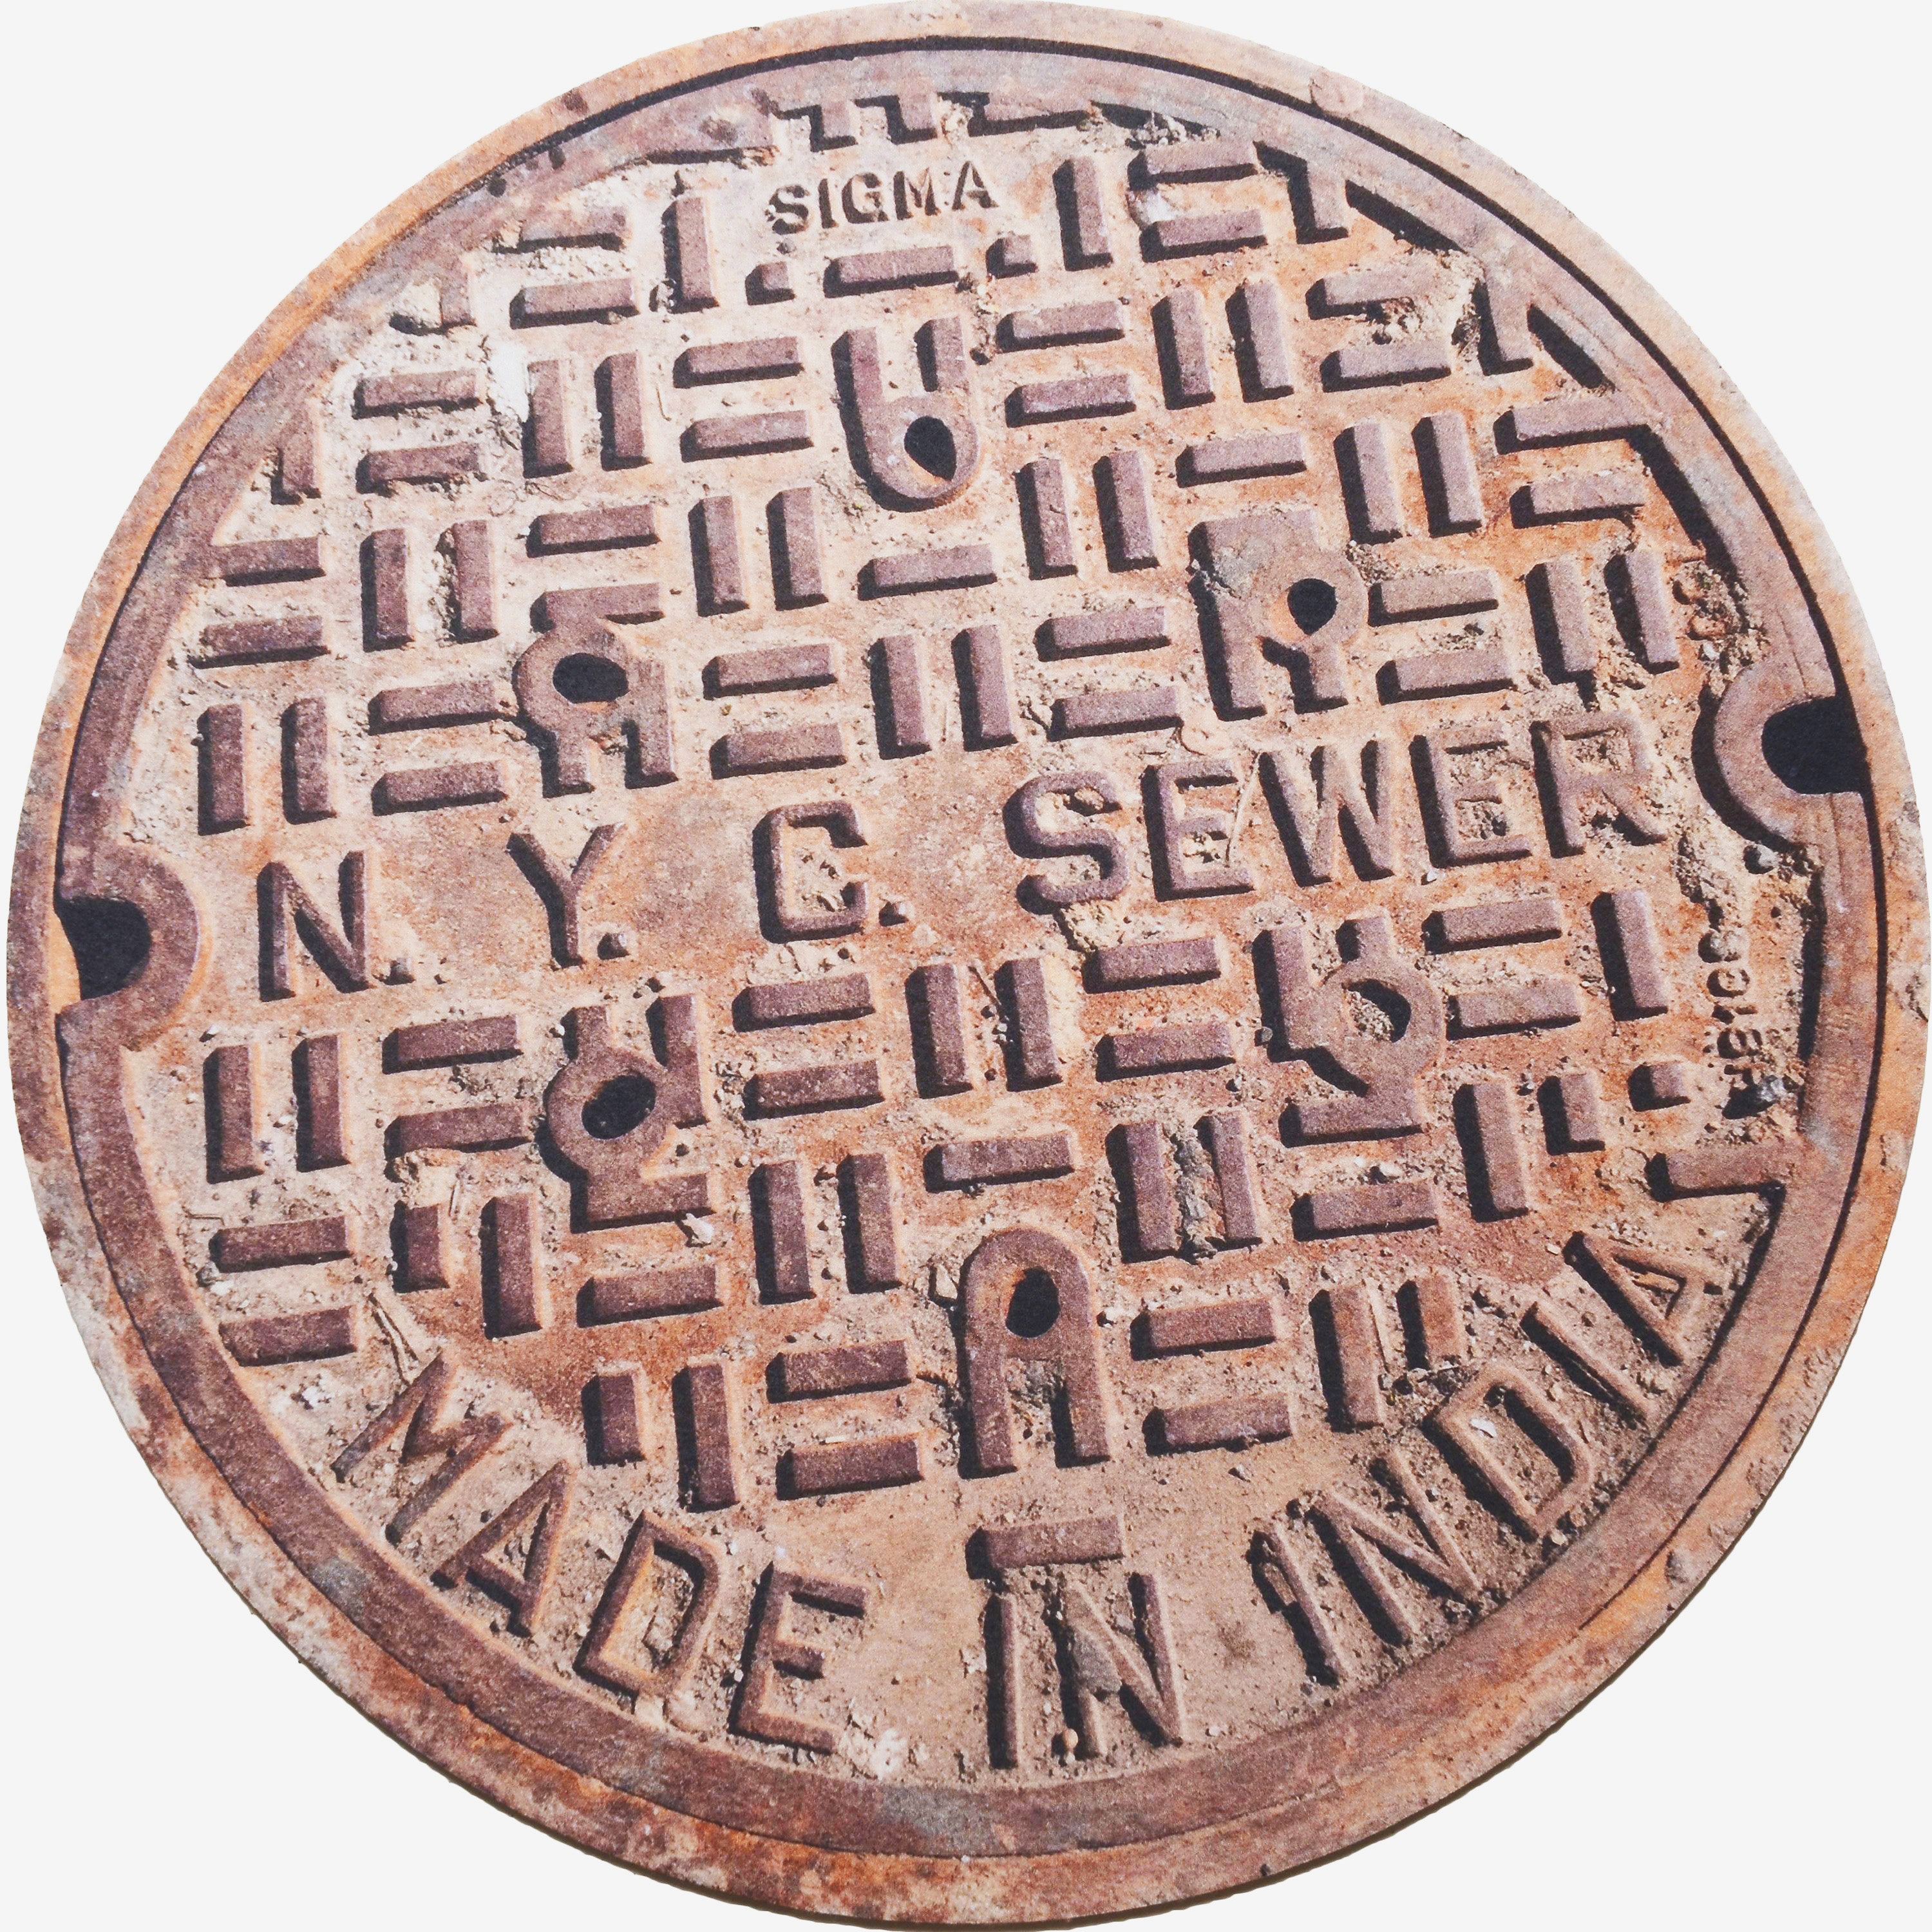 NYC SERIES - Sewer Cover Doormat, Trivet, Coaster - Made in India - New York, NY